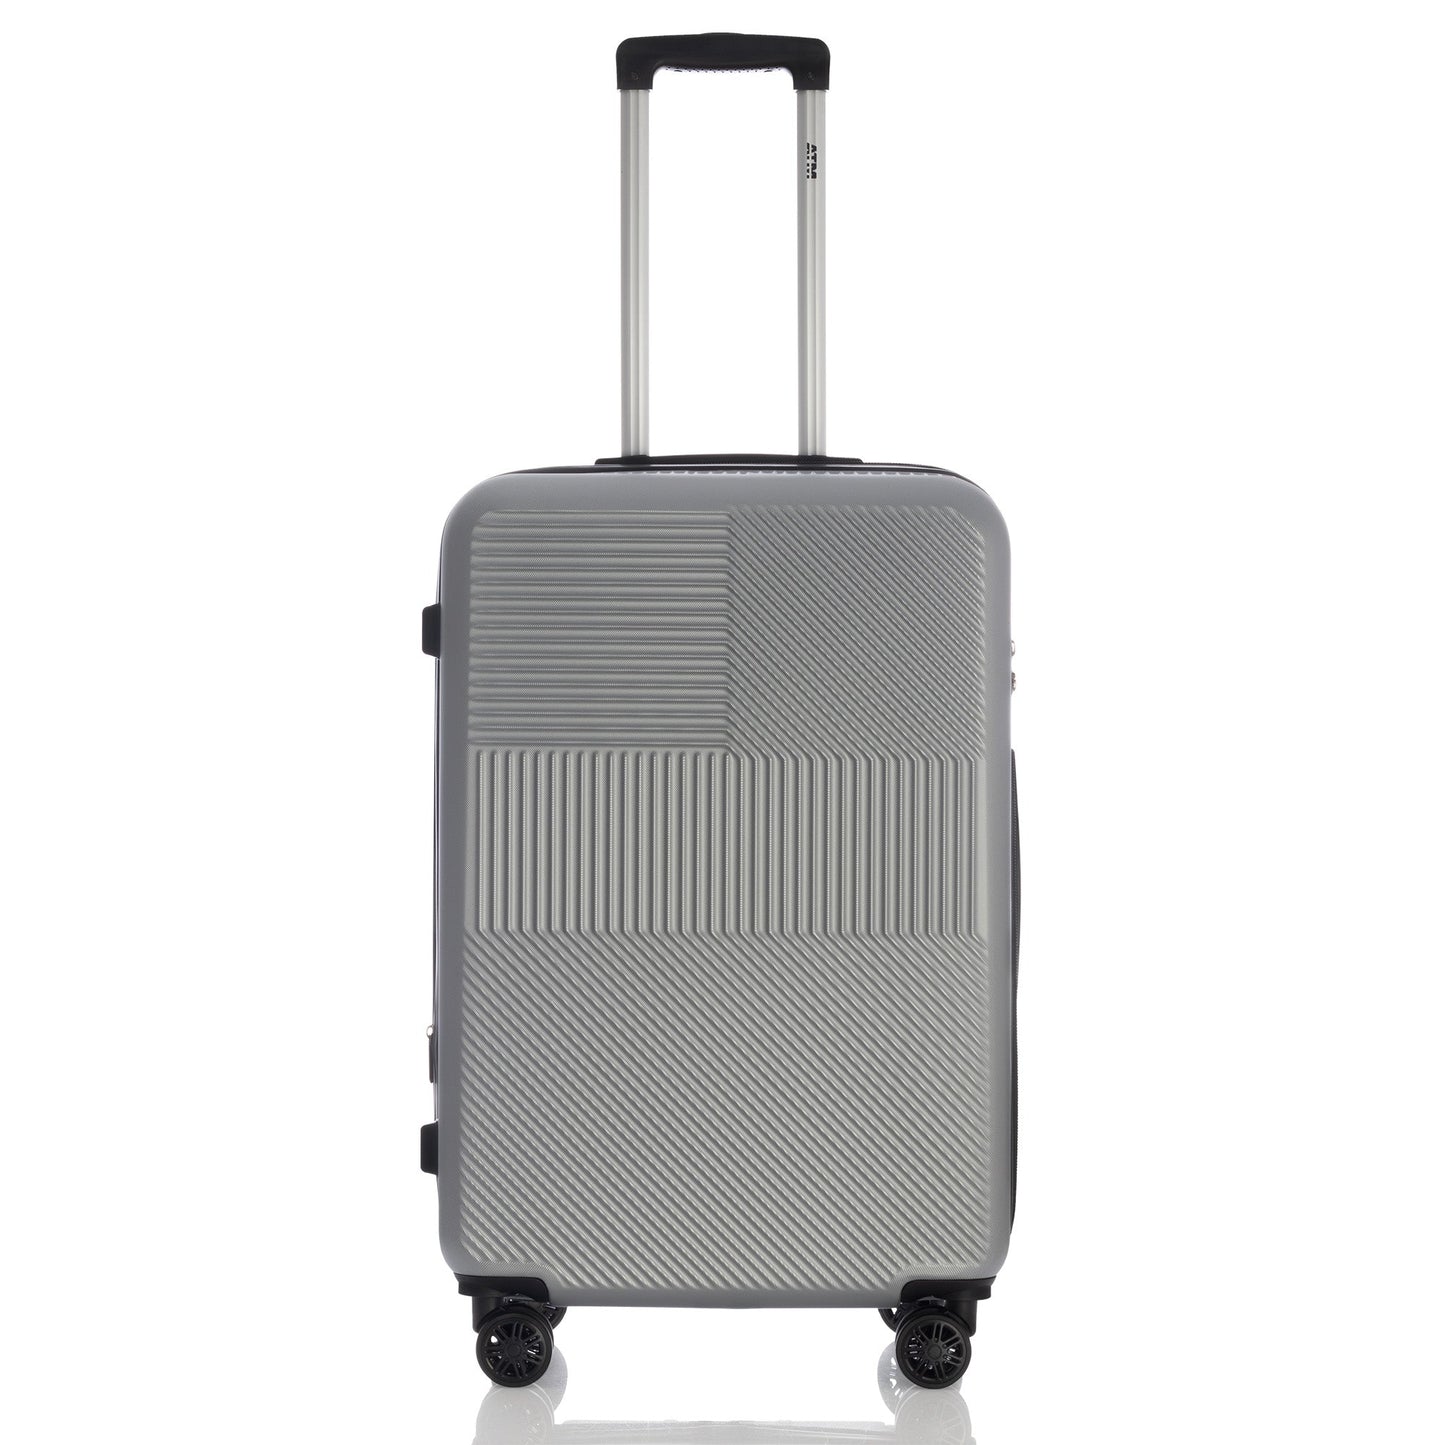 Vita collection luggage silver (18/22/26/30") Suitcase Lock Spinner